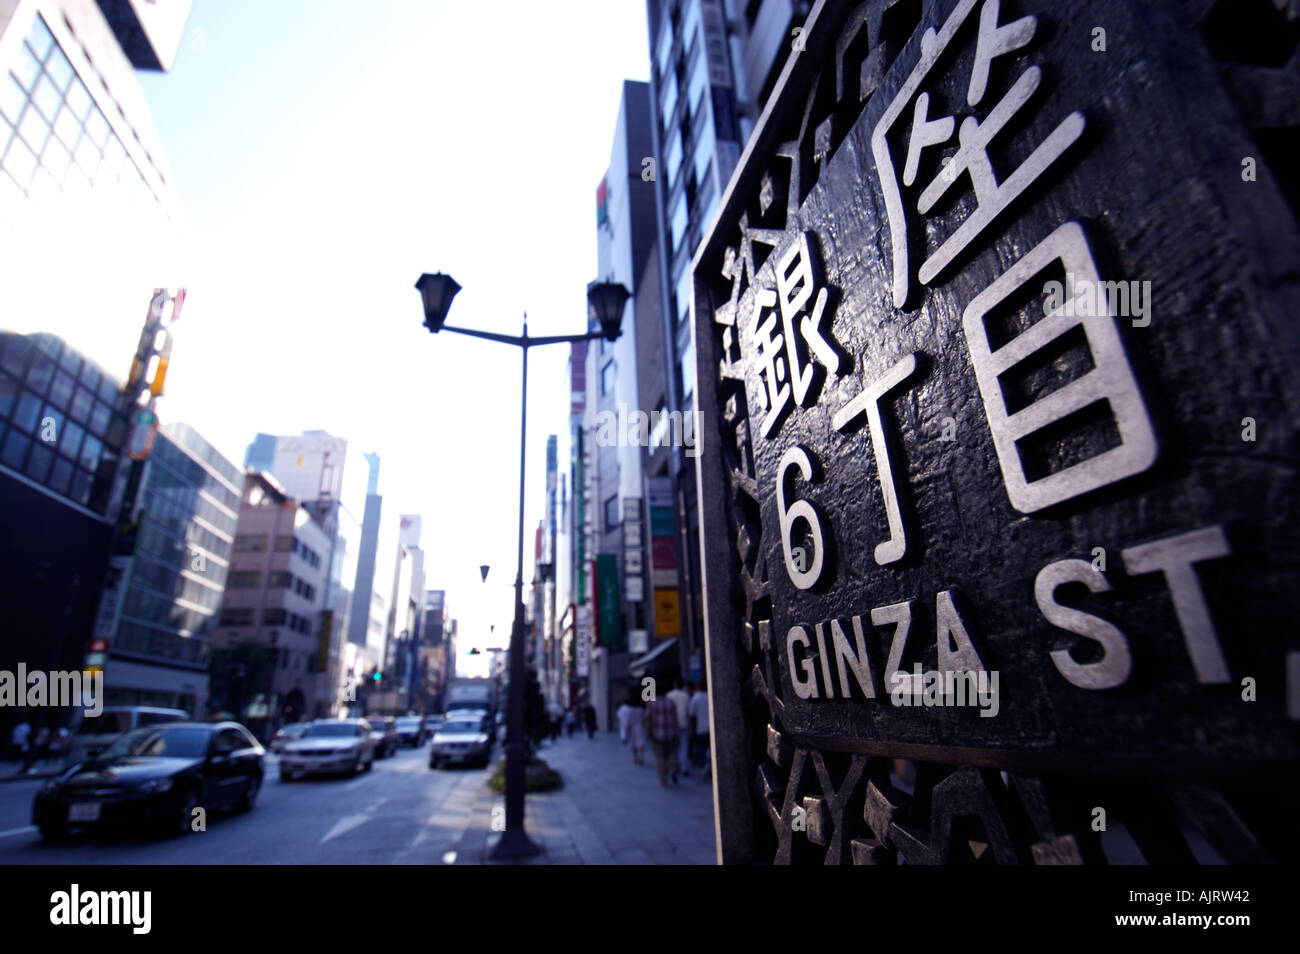 Elegant street sign in upmarket shopping district of Ginza in Tokyo Stock Photo